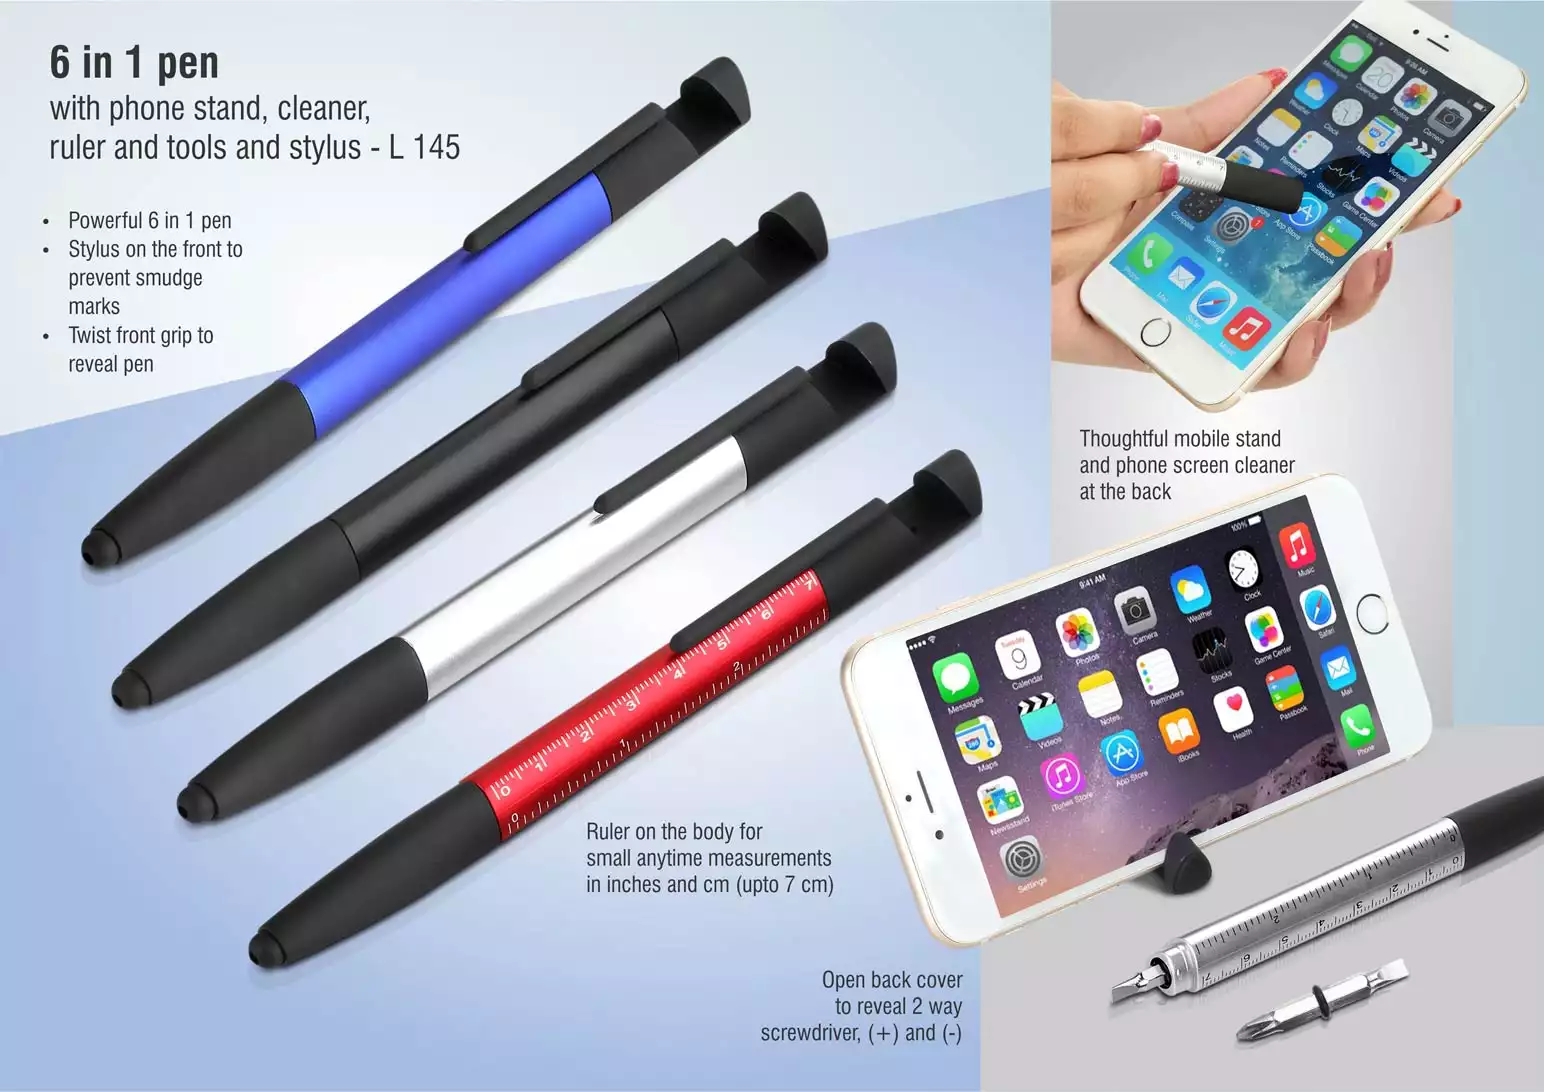 6 in 1 pen with phone stand, cleaner, ruler and tools and stylus